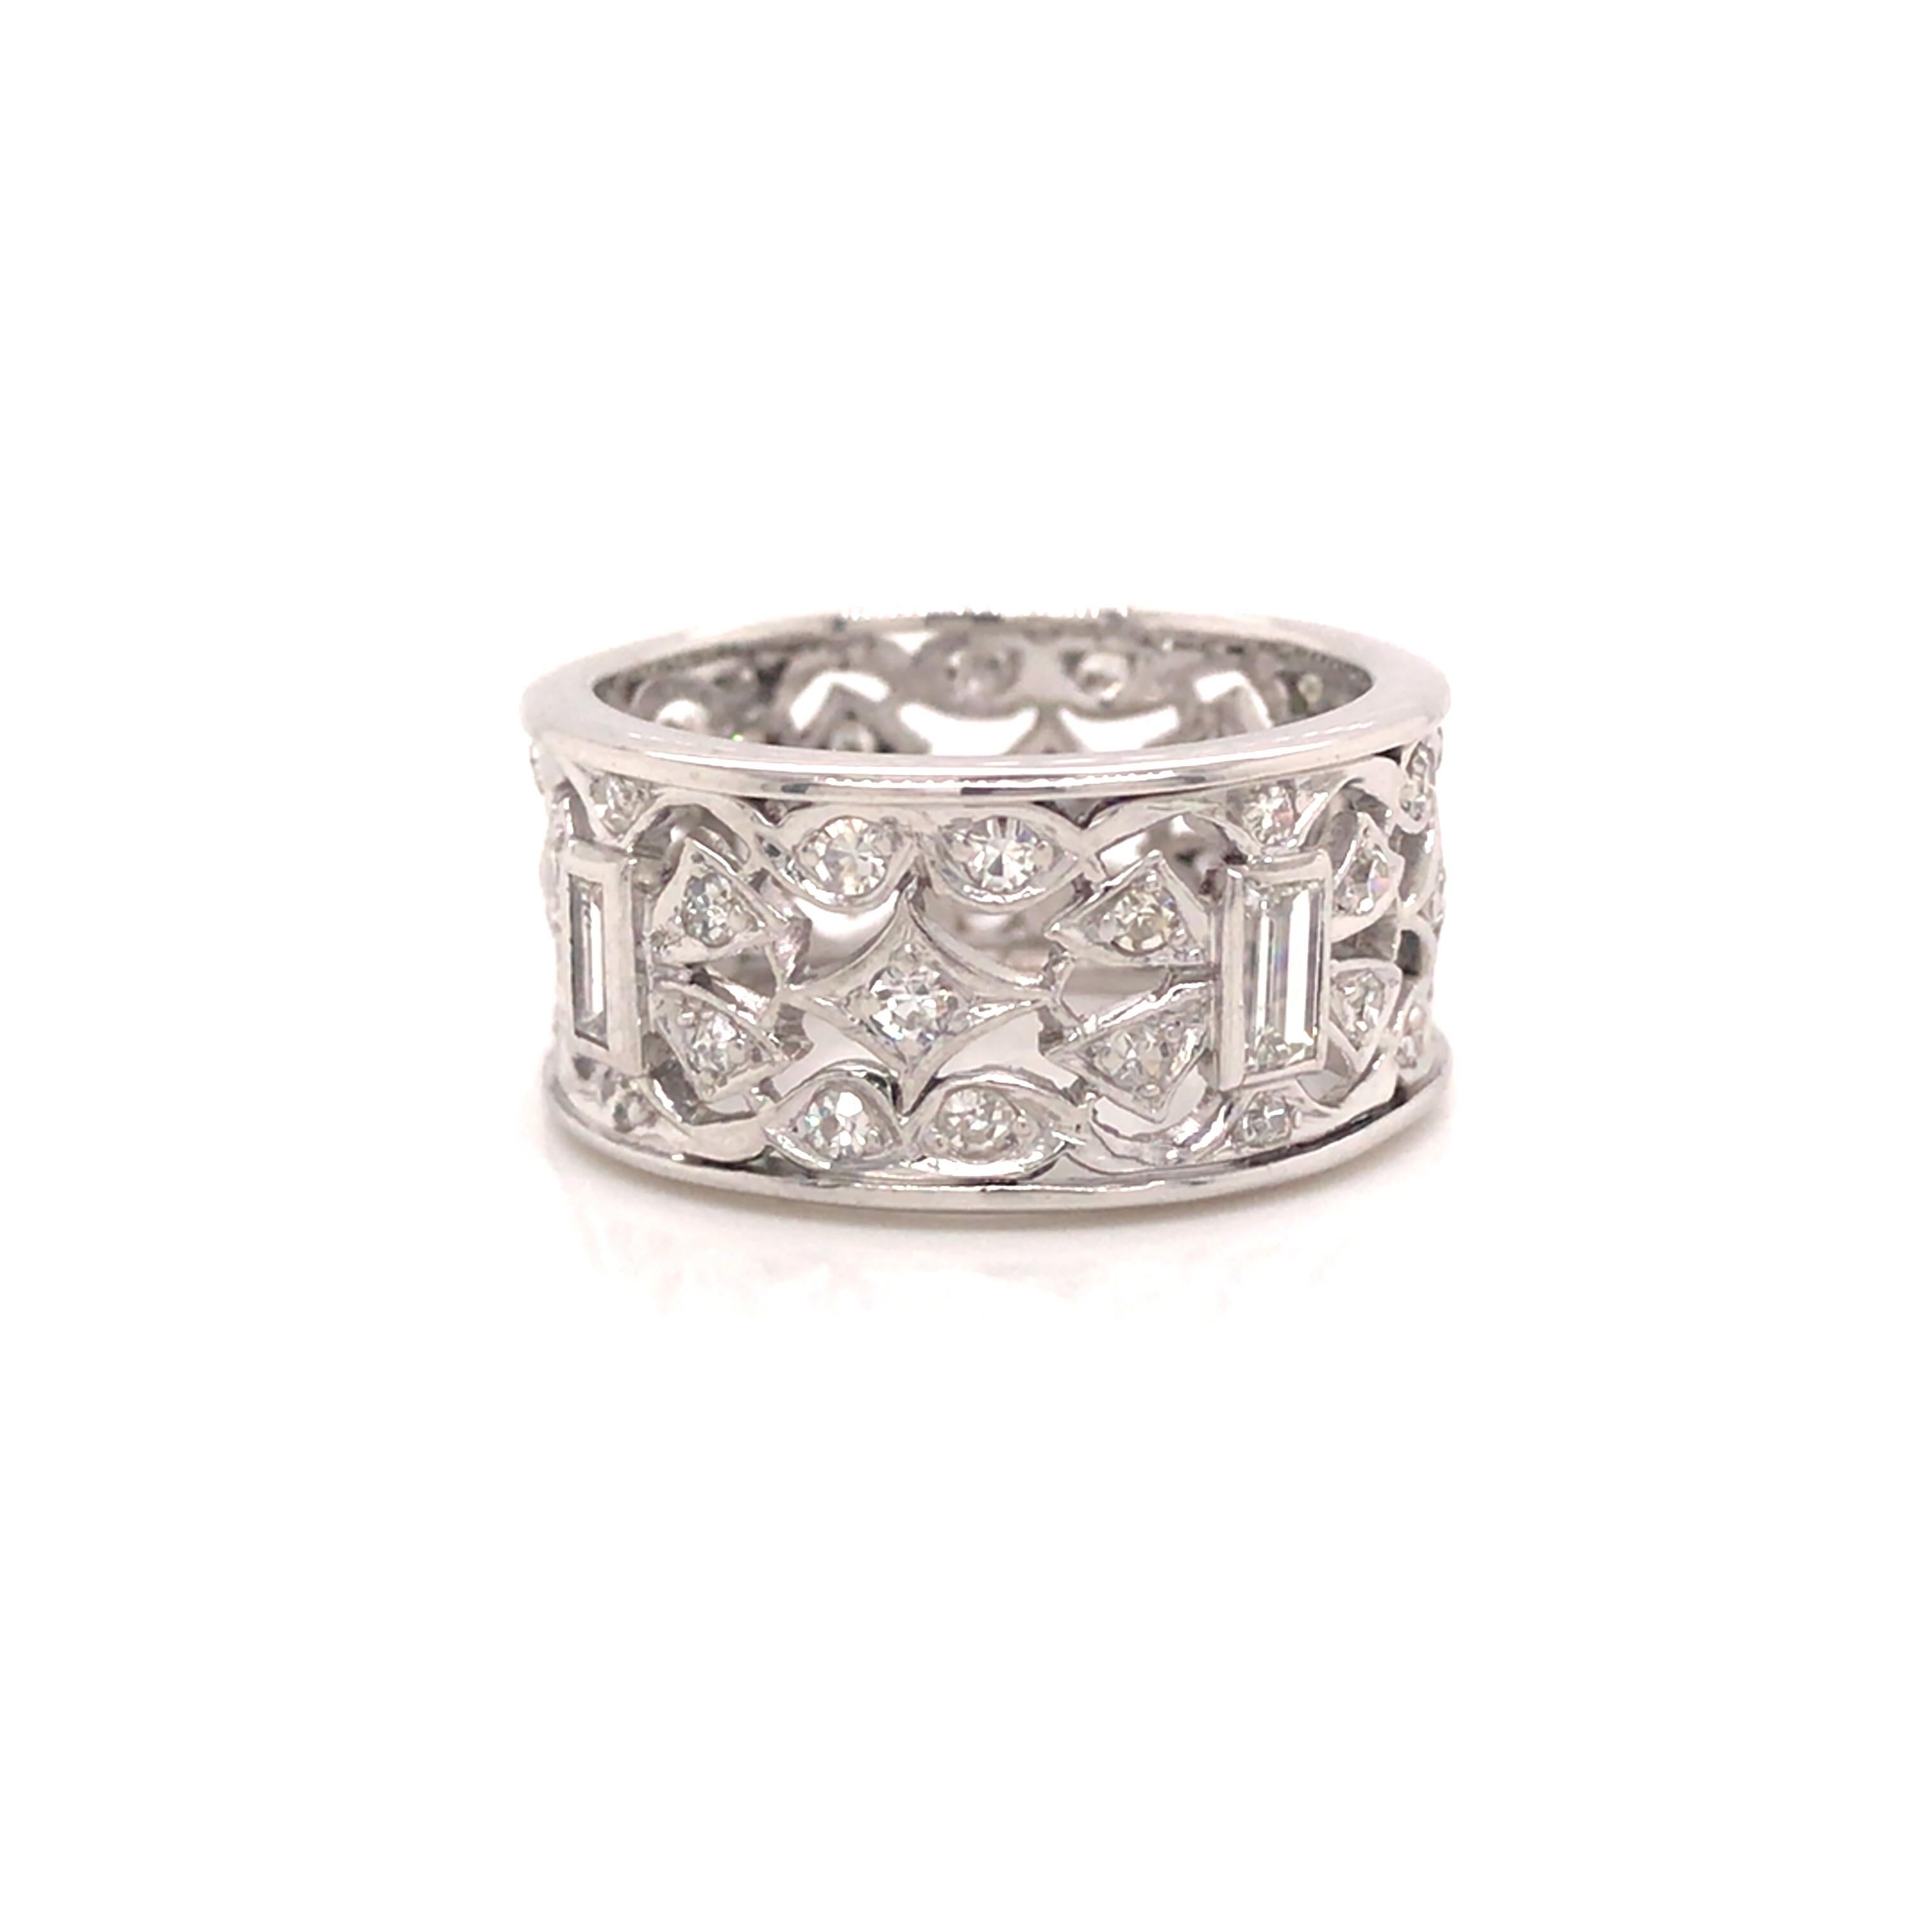 Platinum Diamond Fashion Band.  (48) Round Brilliant Cut and Baguette Diamond weighing 1.35 carat total weight, G-H in color and VS-SI in clarity are expertly set.  The Ring measures 7/16 inch in width.  Ring size 7 1/2. 10.10 Grams.